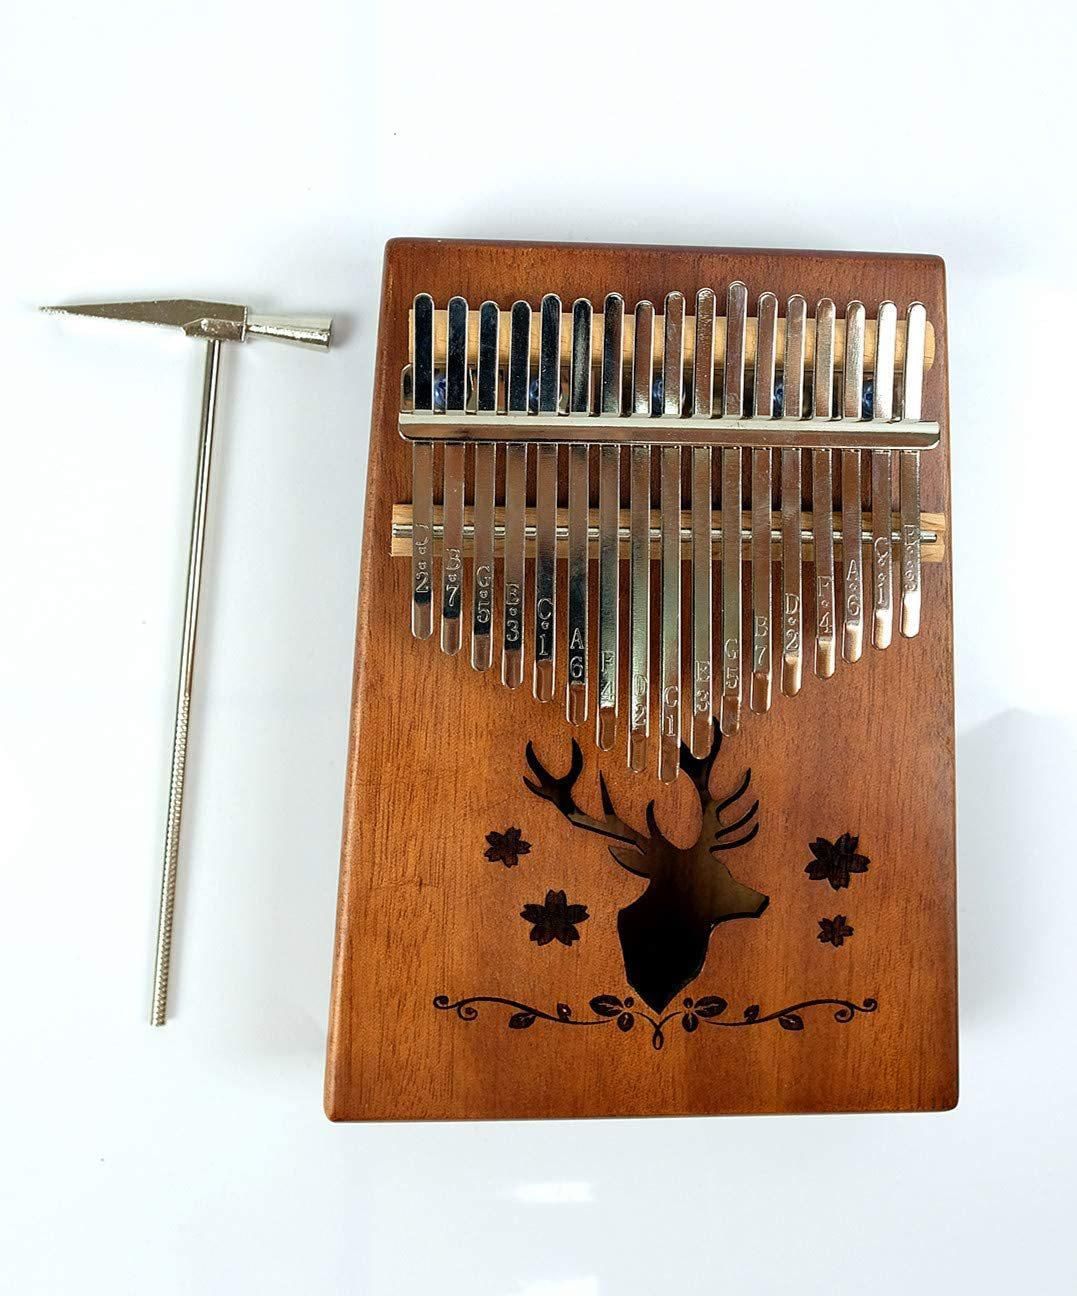 Mike Music Kalimba 17 Keys Thumb Piano Solid Wood Finger Piano Musical Instrument with Study Instruction,Tuning Hammer,Gift for Kids Adult Beginners Professional without any musical basis (deer brown)